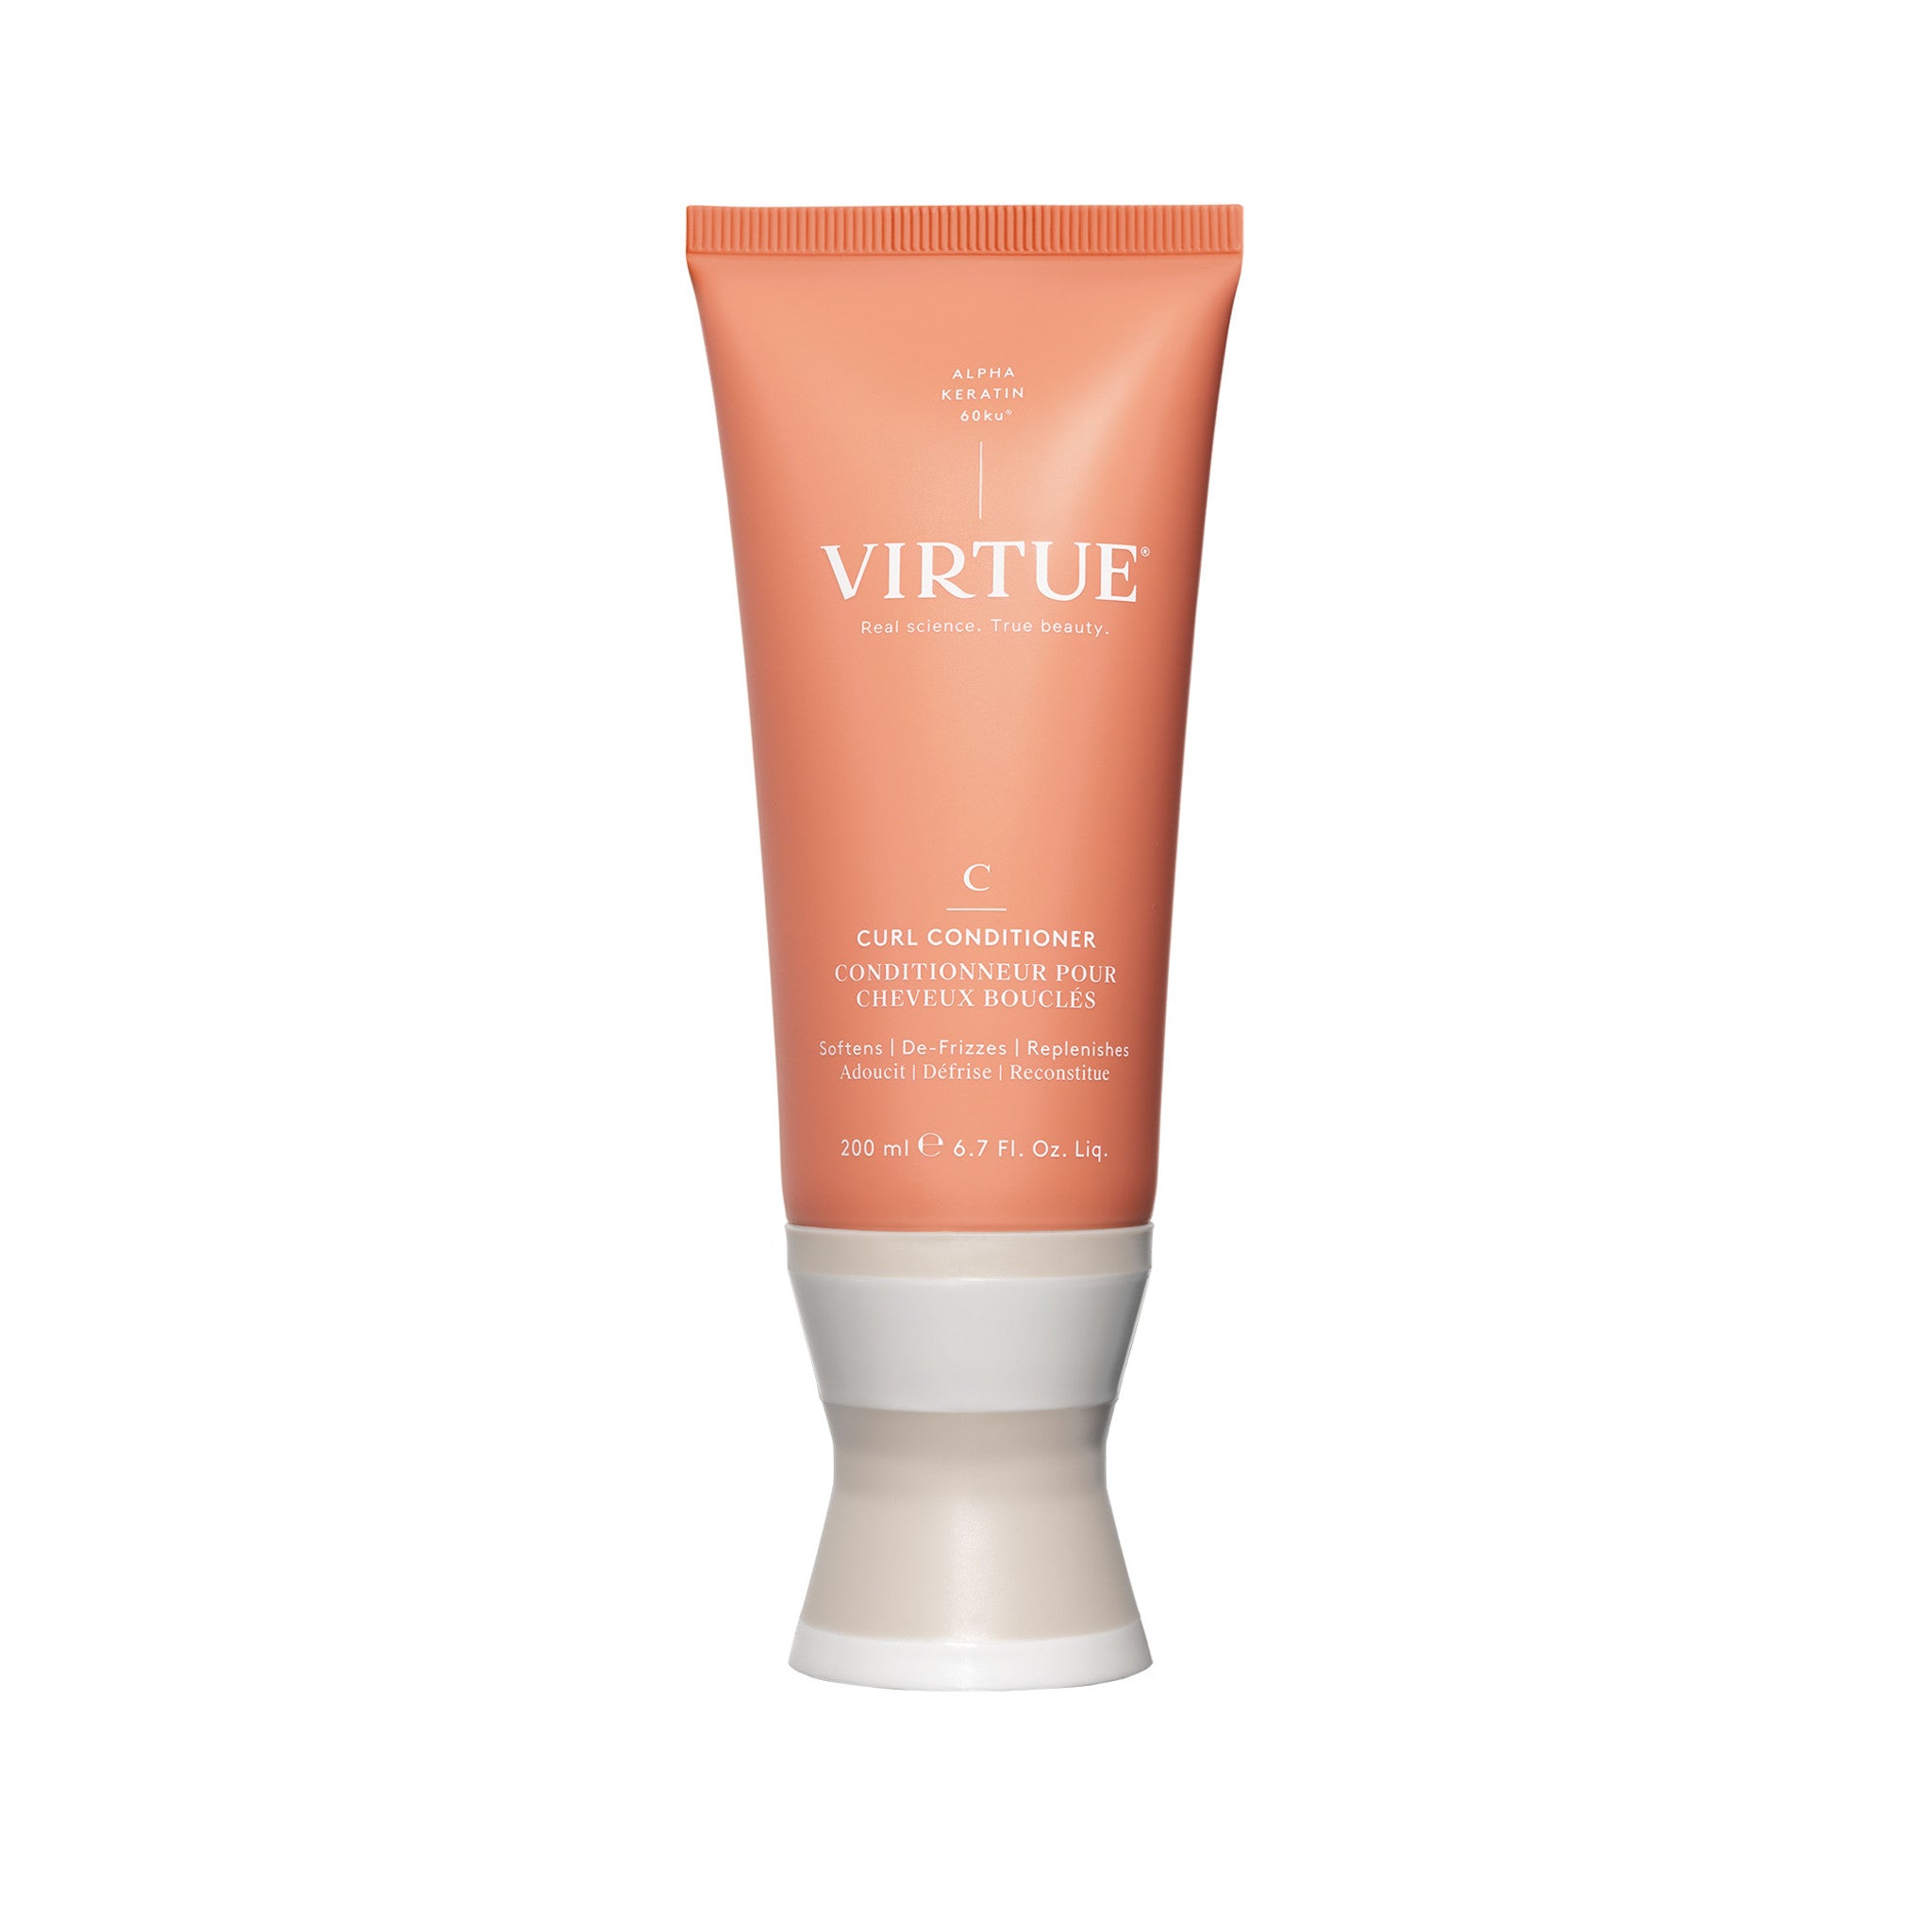 Virtue Curl Conditioner Size variant: 6.7 oz | 200 ml main image.